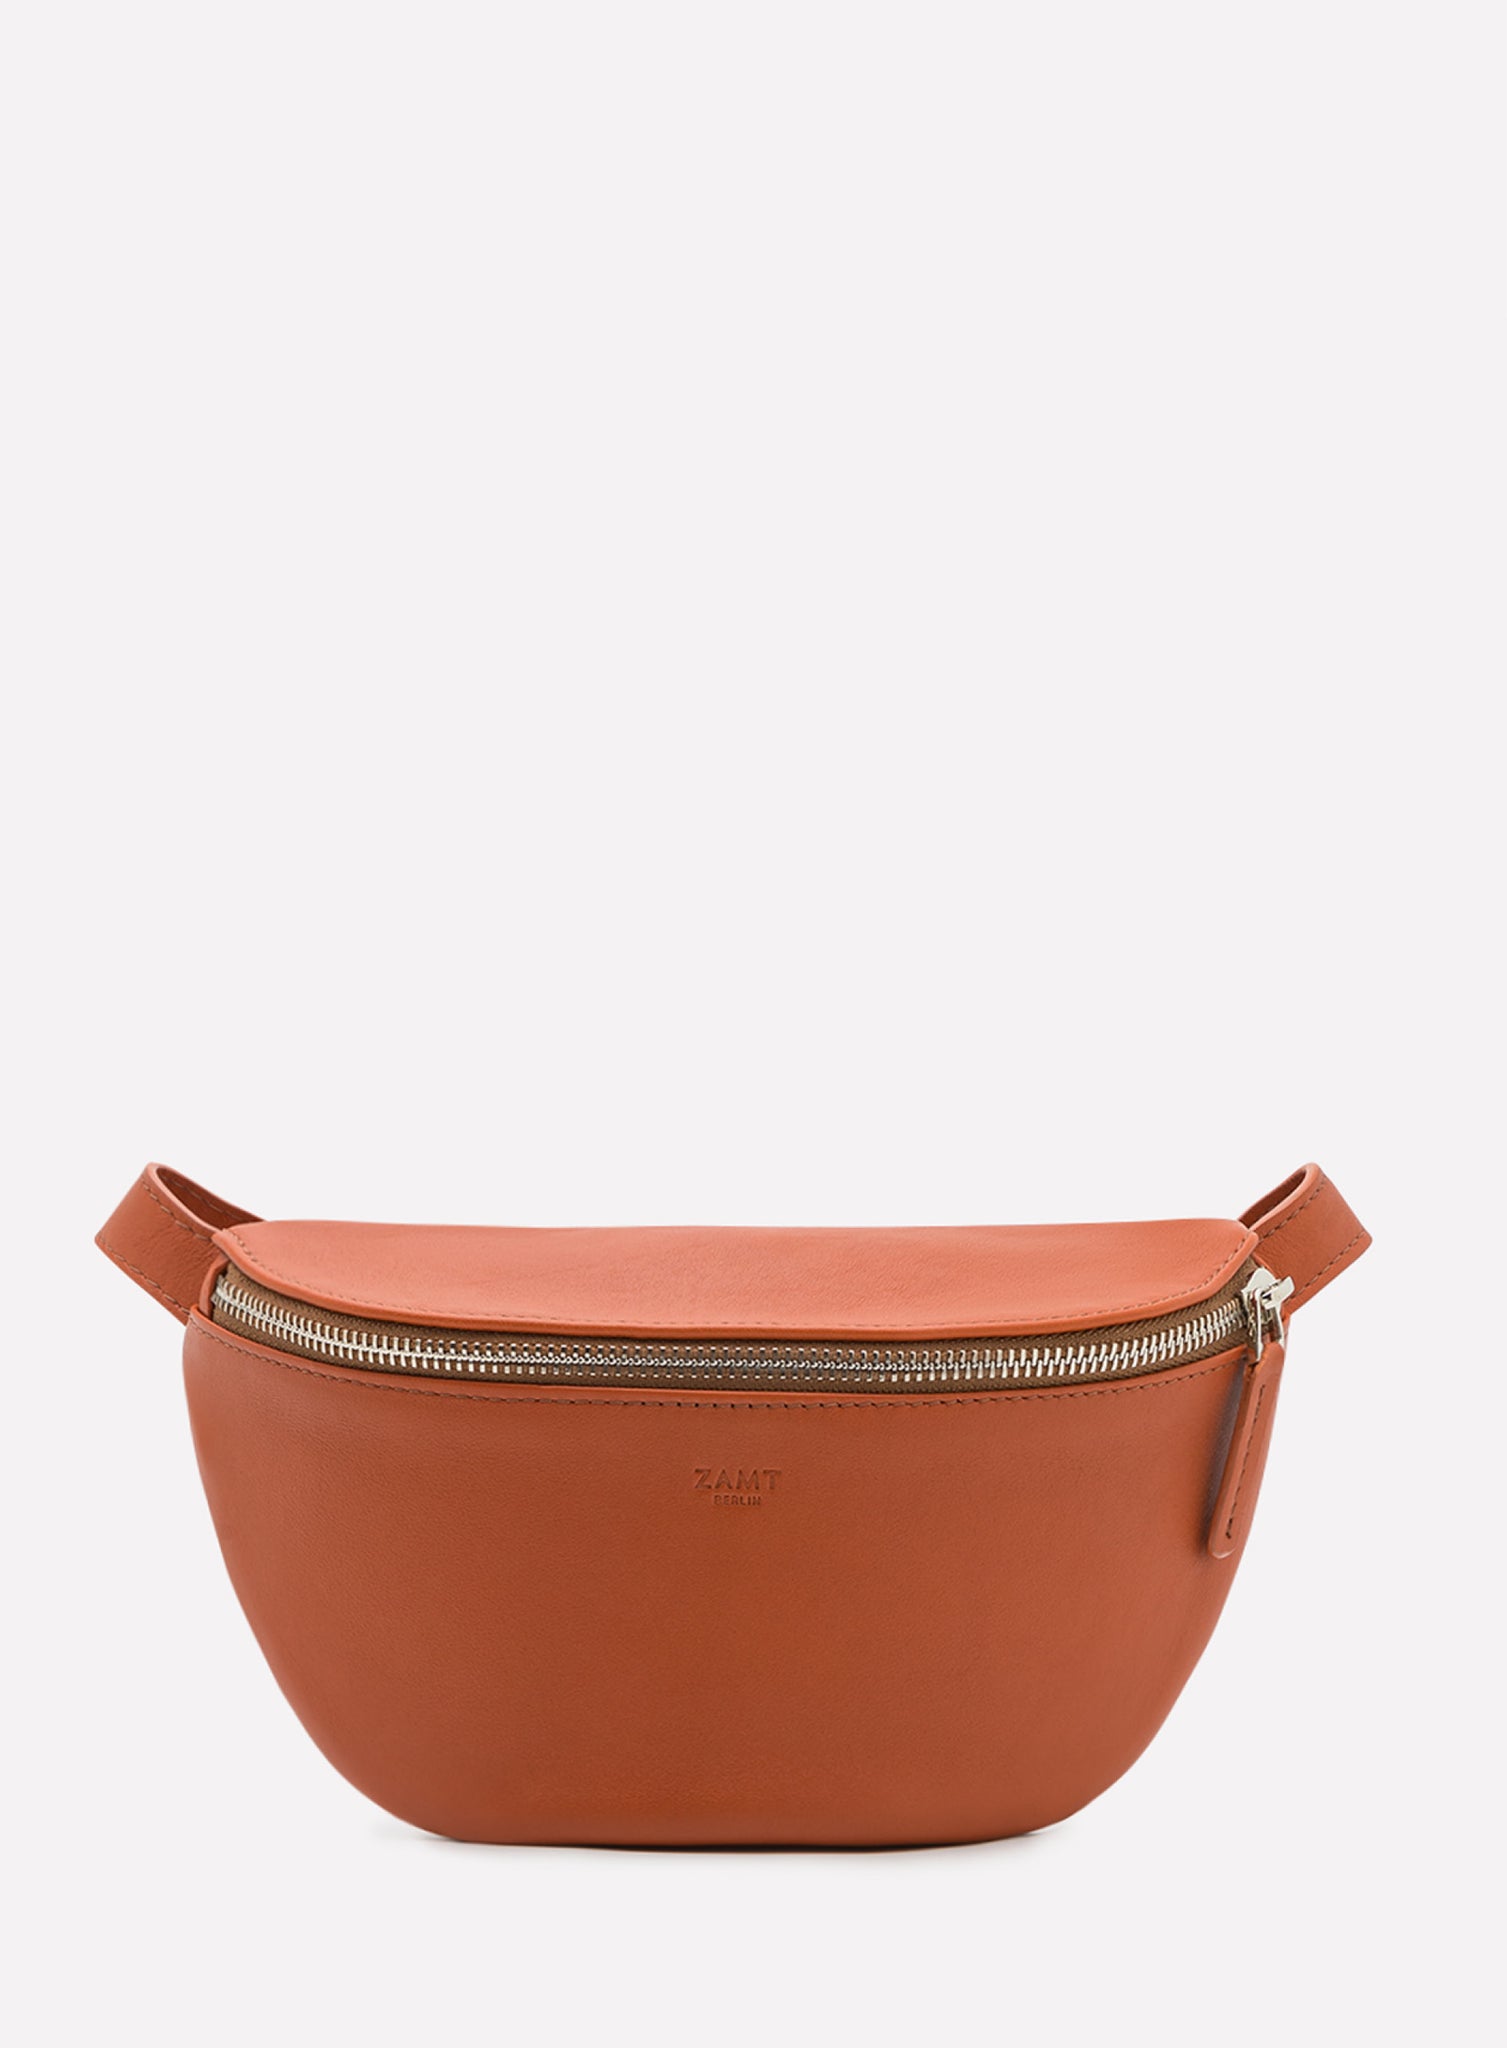 HIP_BAG_CAN_Terracotta_Designed_in_Berlin_Made_to_last_Handmade_in_Poland.